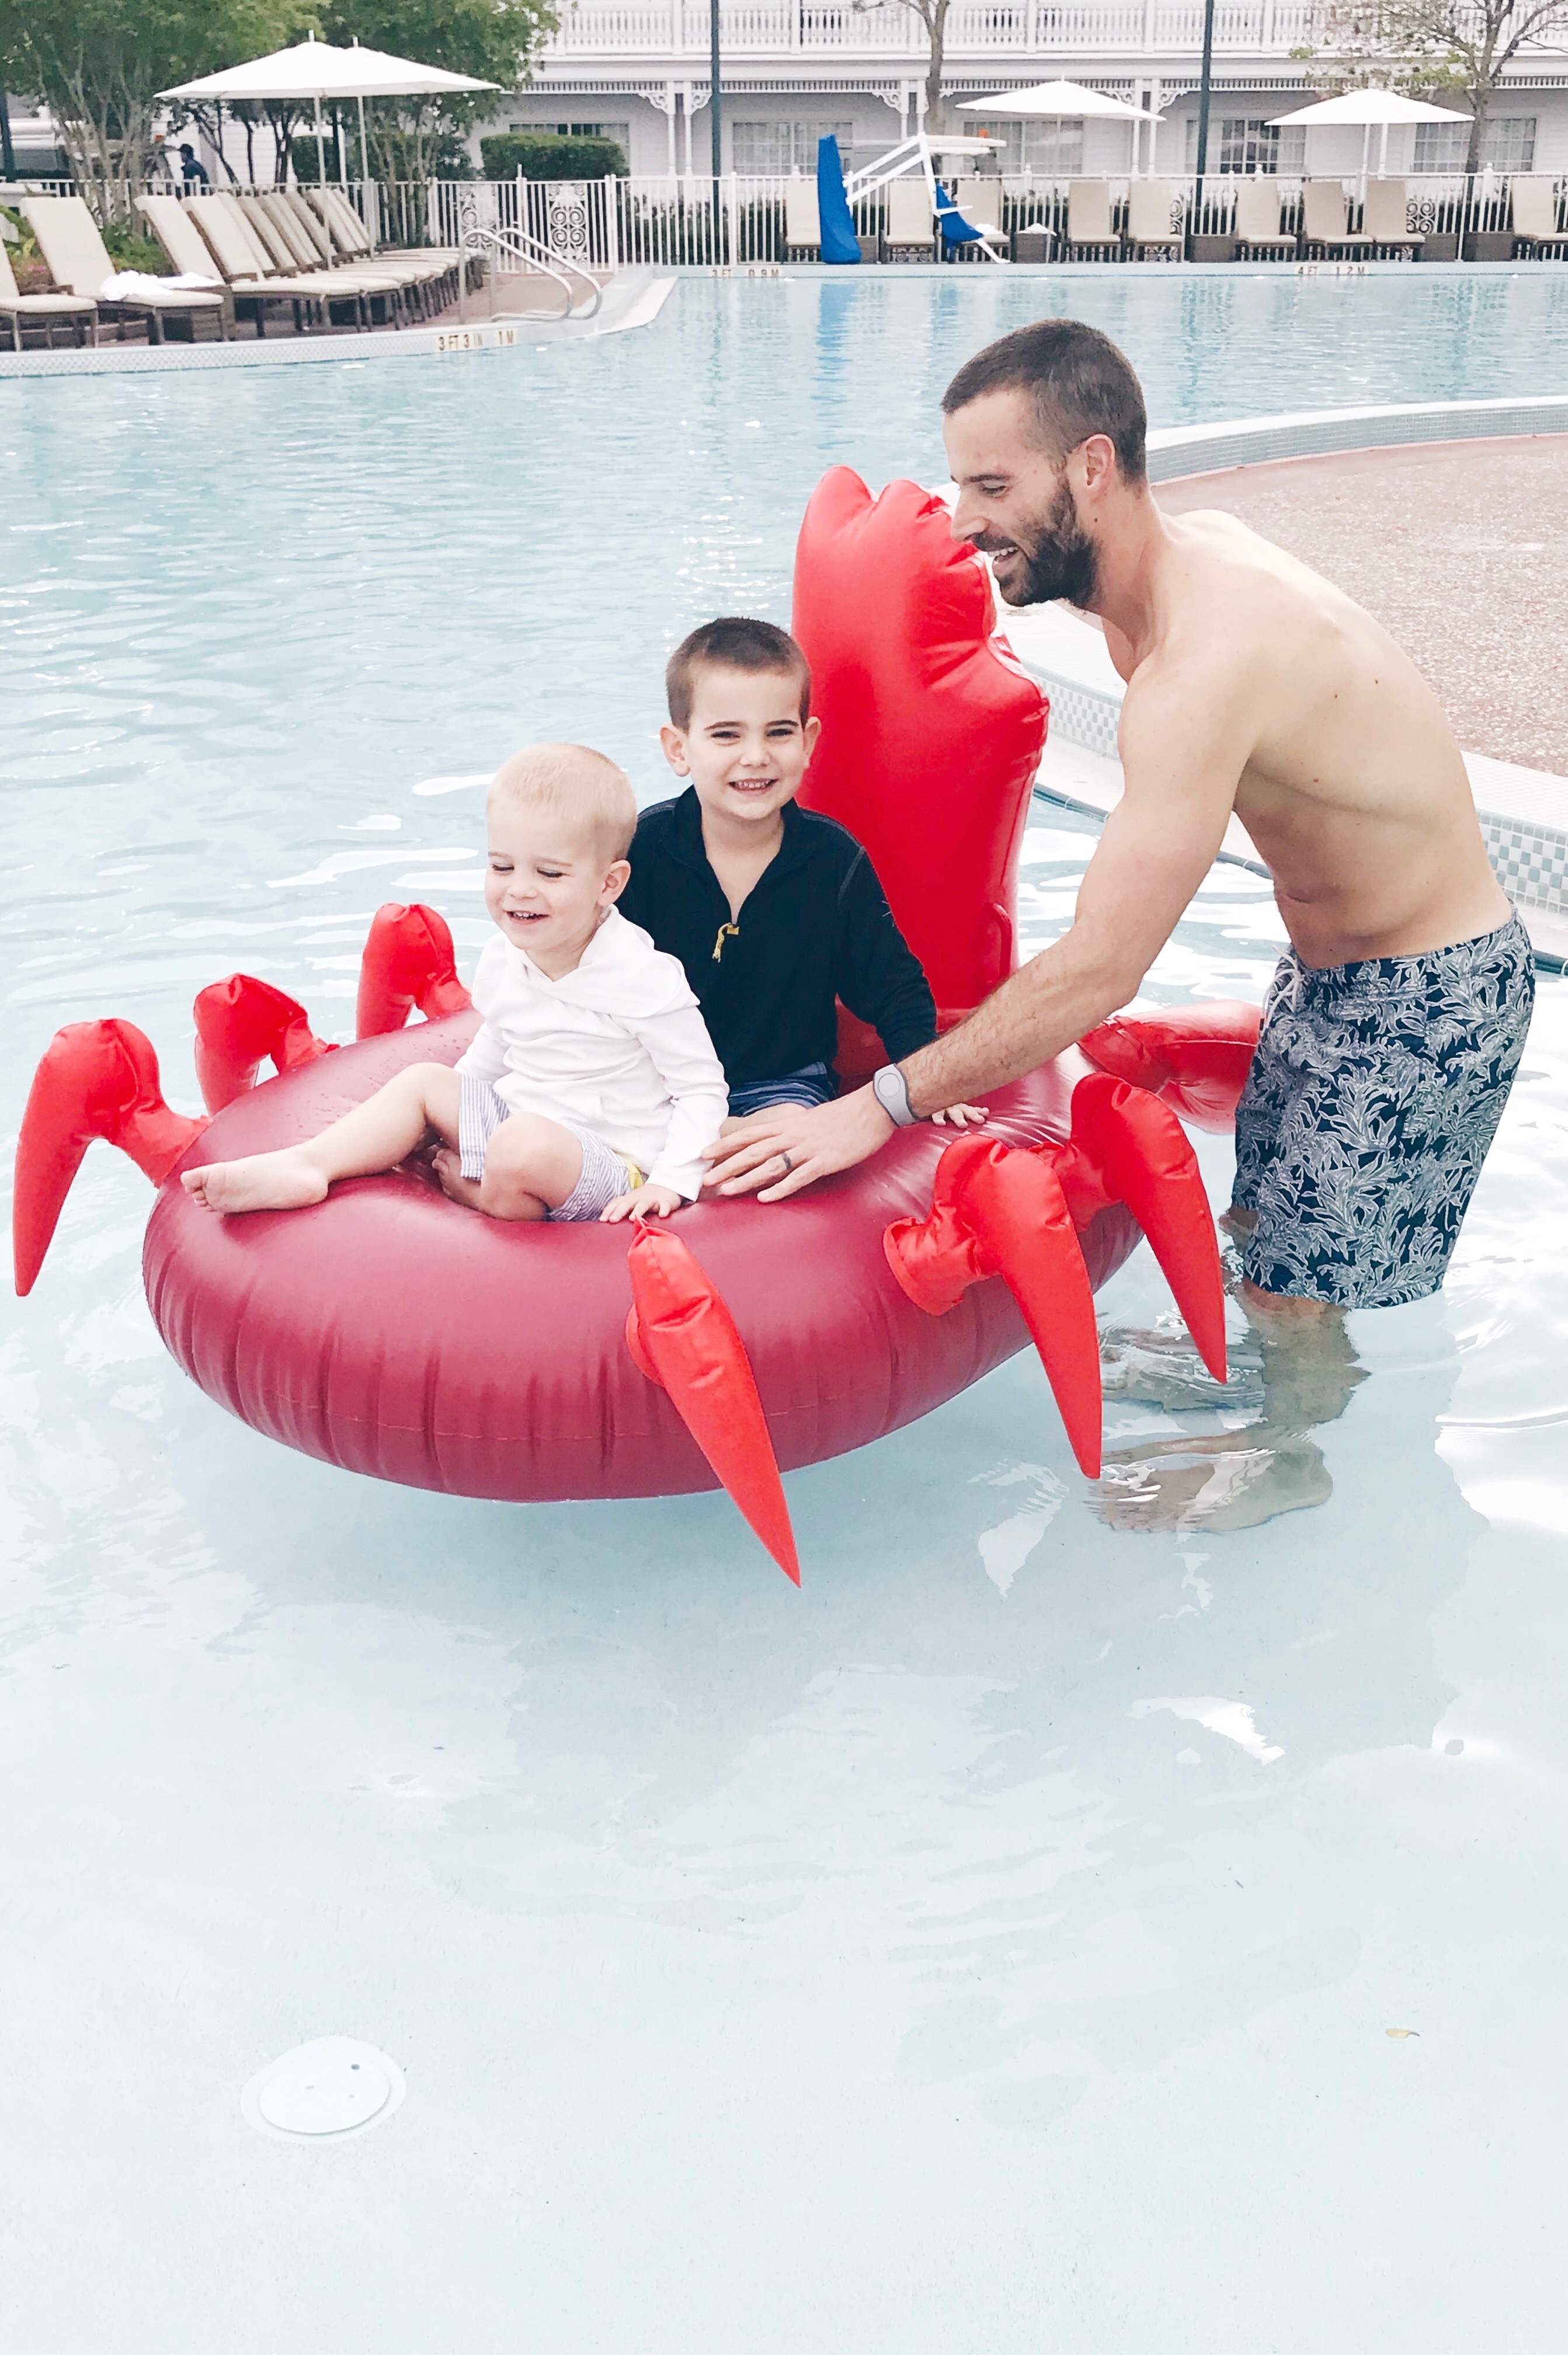 little mermaid pool party - two young boys with Dad on sebastian pool float